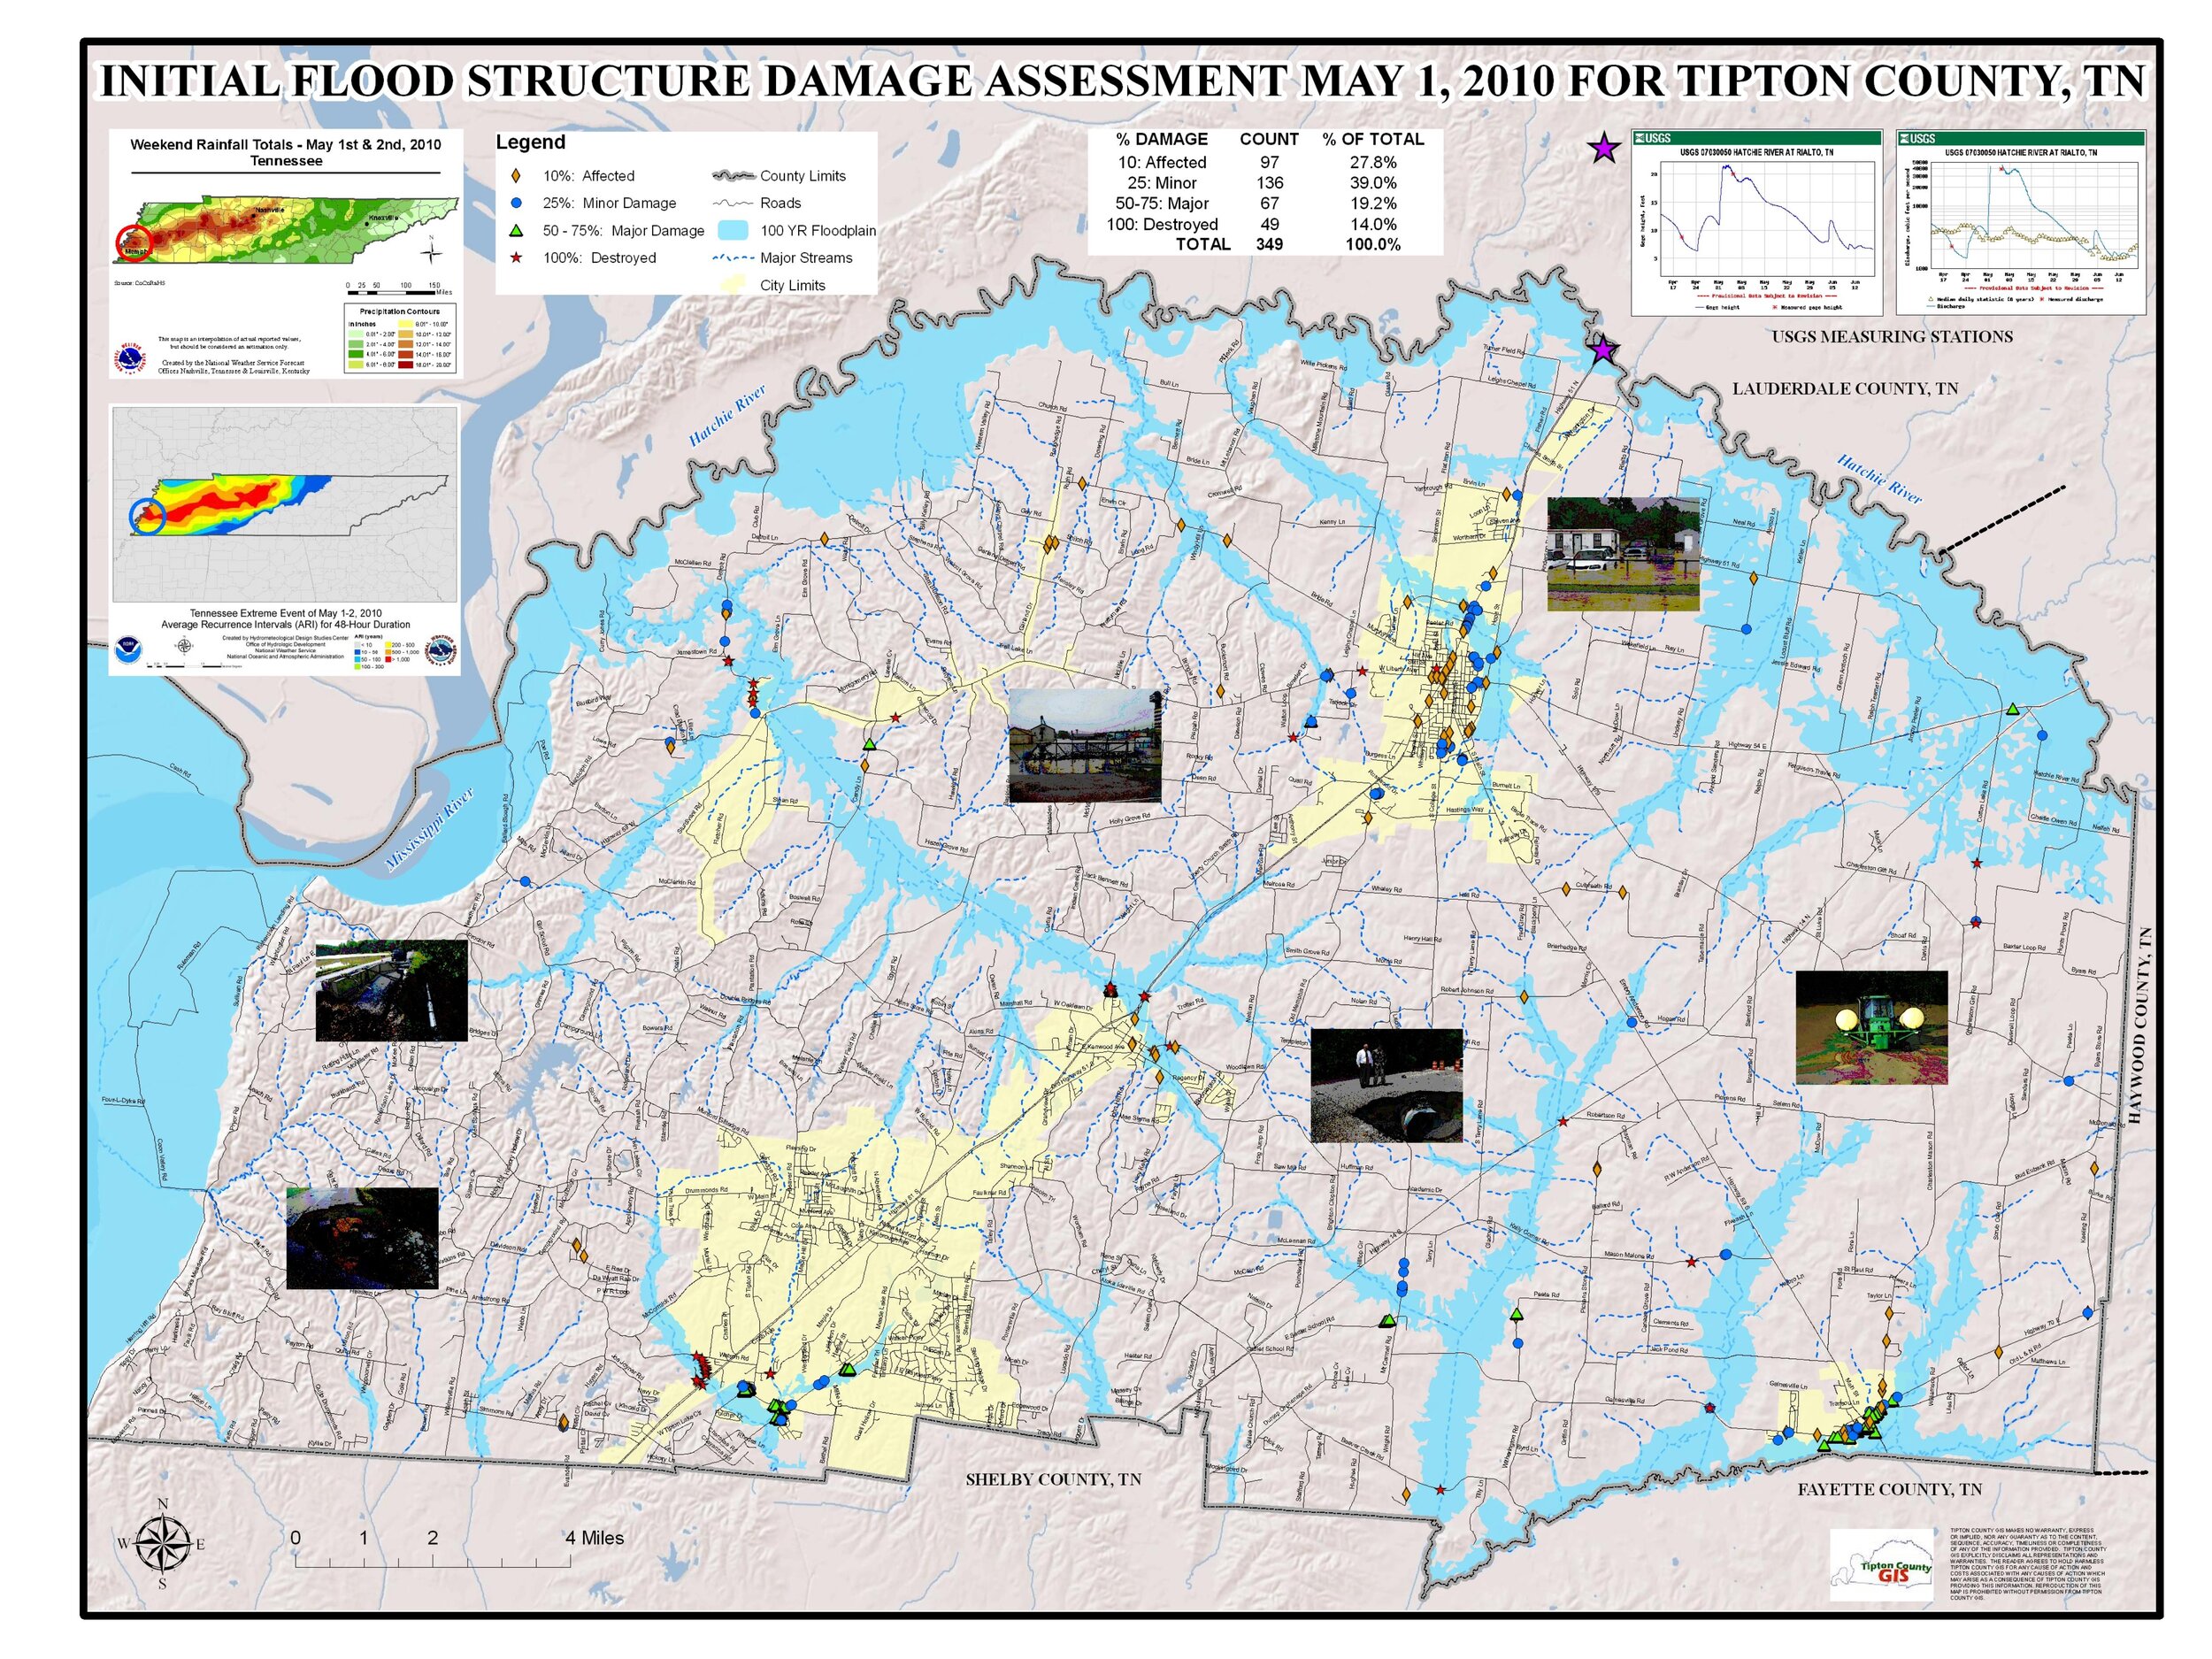 Initial Flood Structure Assessment May 1, 2010 for Tipton County, TN